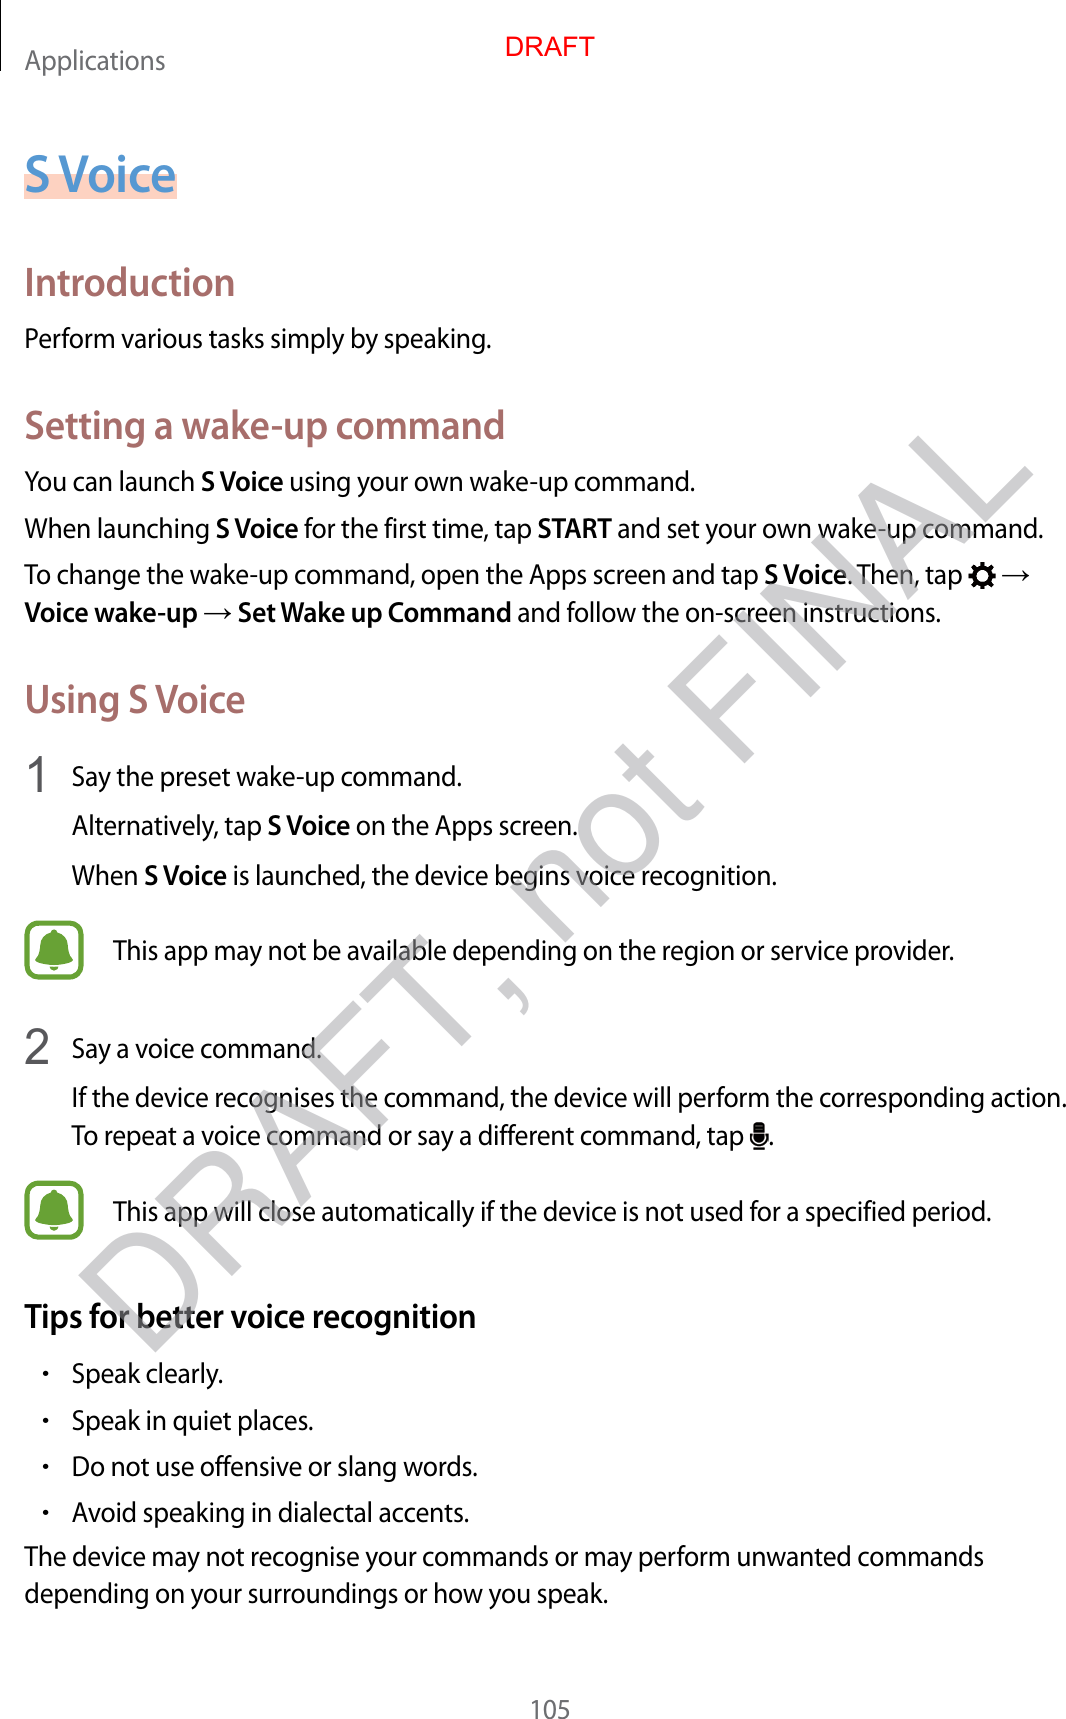 Applications105S VoiceIntroductionPerform various tasks simply by speaking.Setting a wake-up commandYou can launch S Voice using your own wake-up command.When launching S Voice for the first time, tap START and set your own wake-up command.To change the wake-up command, open the Apps screen and tap S Voice. Then, tap    Voice wake-up  Set Wake up Command and follow the on-screen instructions.Using S Voice1  Say the preset wake-up command.Alternatively, tap S Voice on the Apps screen.When S Voice is launched, the device begins voice recognition.This app may not be available depending on the region or service provider.2  Say a voice command.If the device recognises the command, the device will perform the corresponding action. To repeat a voice command or say a different command, tap  .This app will close automatically if the device is not used for a specified period.Tips for better voice recognition•Speak clearly.•Speak in quiet places.•Do not use offensive or slang words.•Avoid speaking in dialectal accents.The device may not recognise your commands or may perform unwanted commands depending on your surroundings or how you speak.DRAFTDRAFT, not FINAL